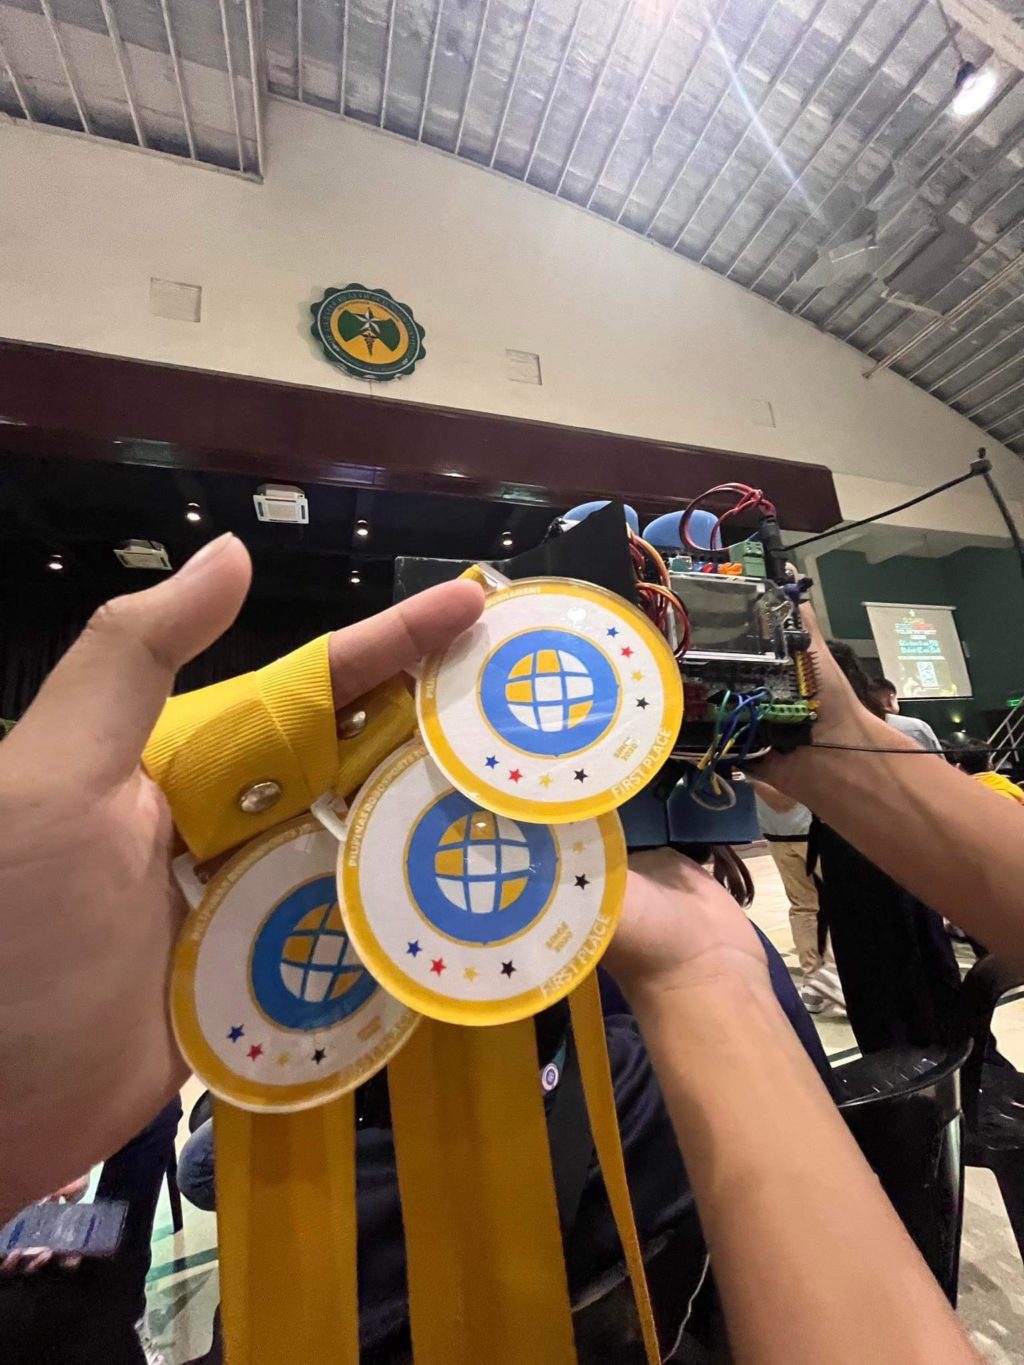 Yhen Meagan Sitee and three of her junior high school classmates of the City of Bogo Science and Arts Academy win gold medals in the RoboSports Tournament in Dasmariñas City in Cavite on Feb. 4, 2023. | Contributed photo